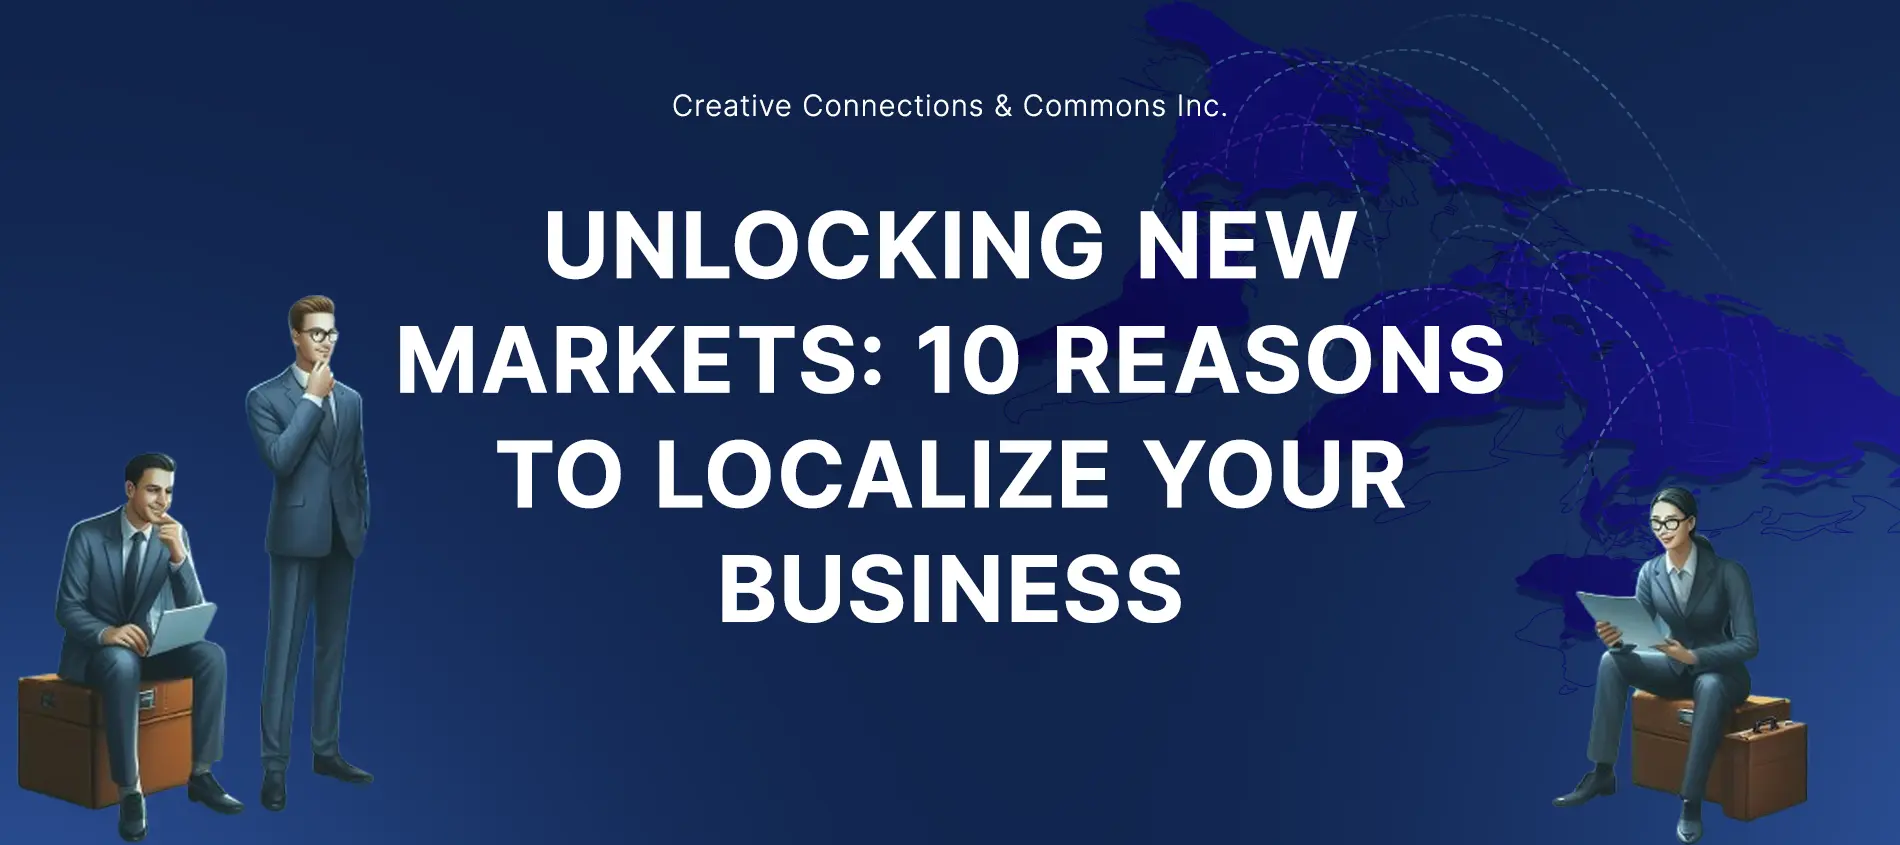 Unlocking New Markets 10 Reasons to Localize Your Business